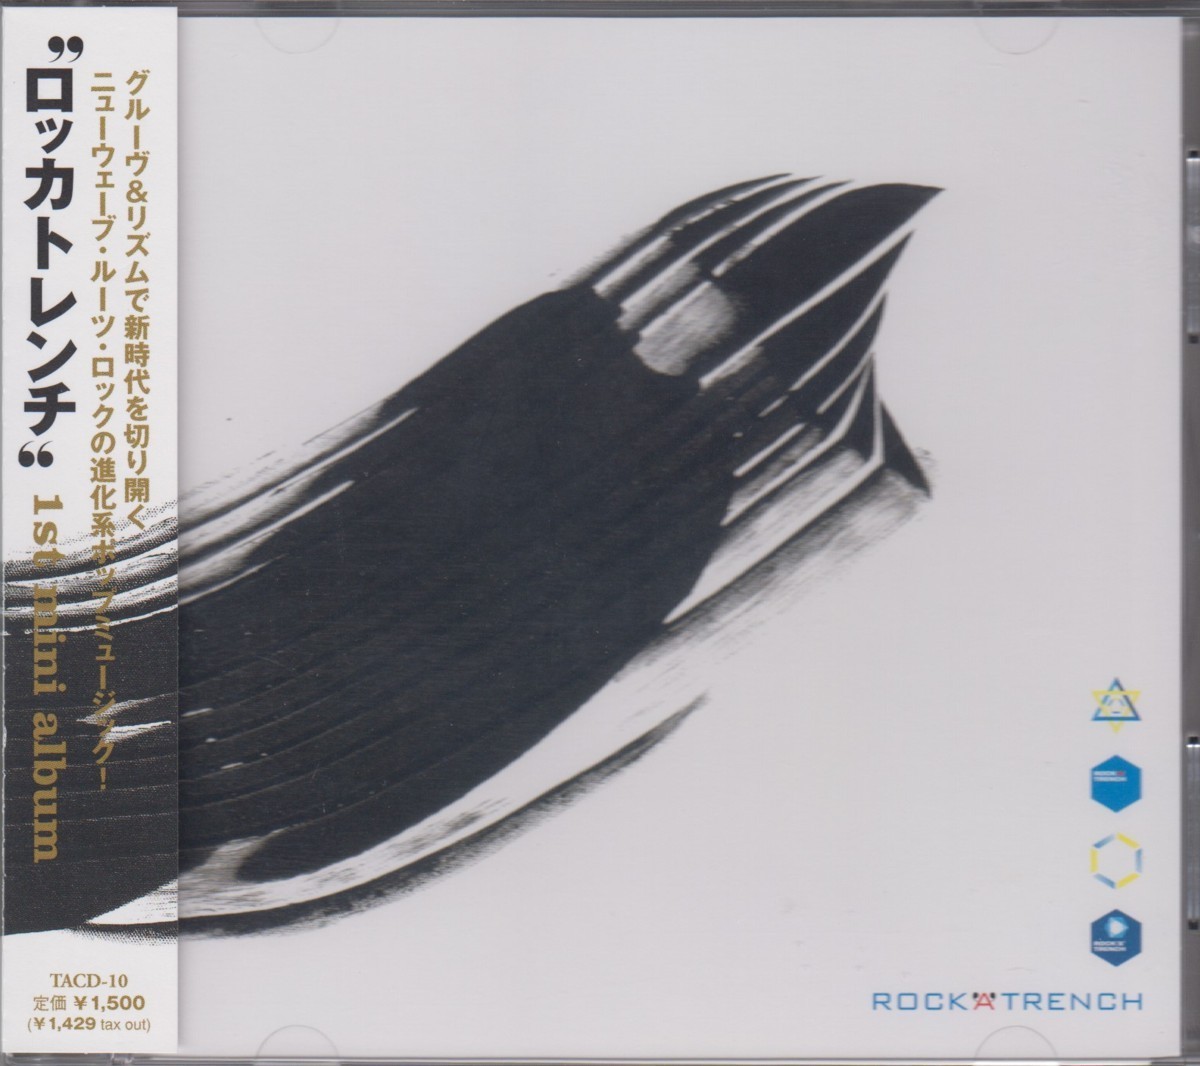 ROCK’A’TRENCH / ロッカトレンチ ★中古盤 /211205_画像1